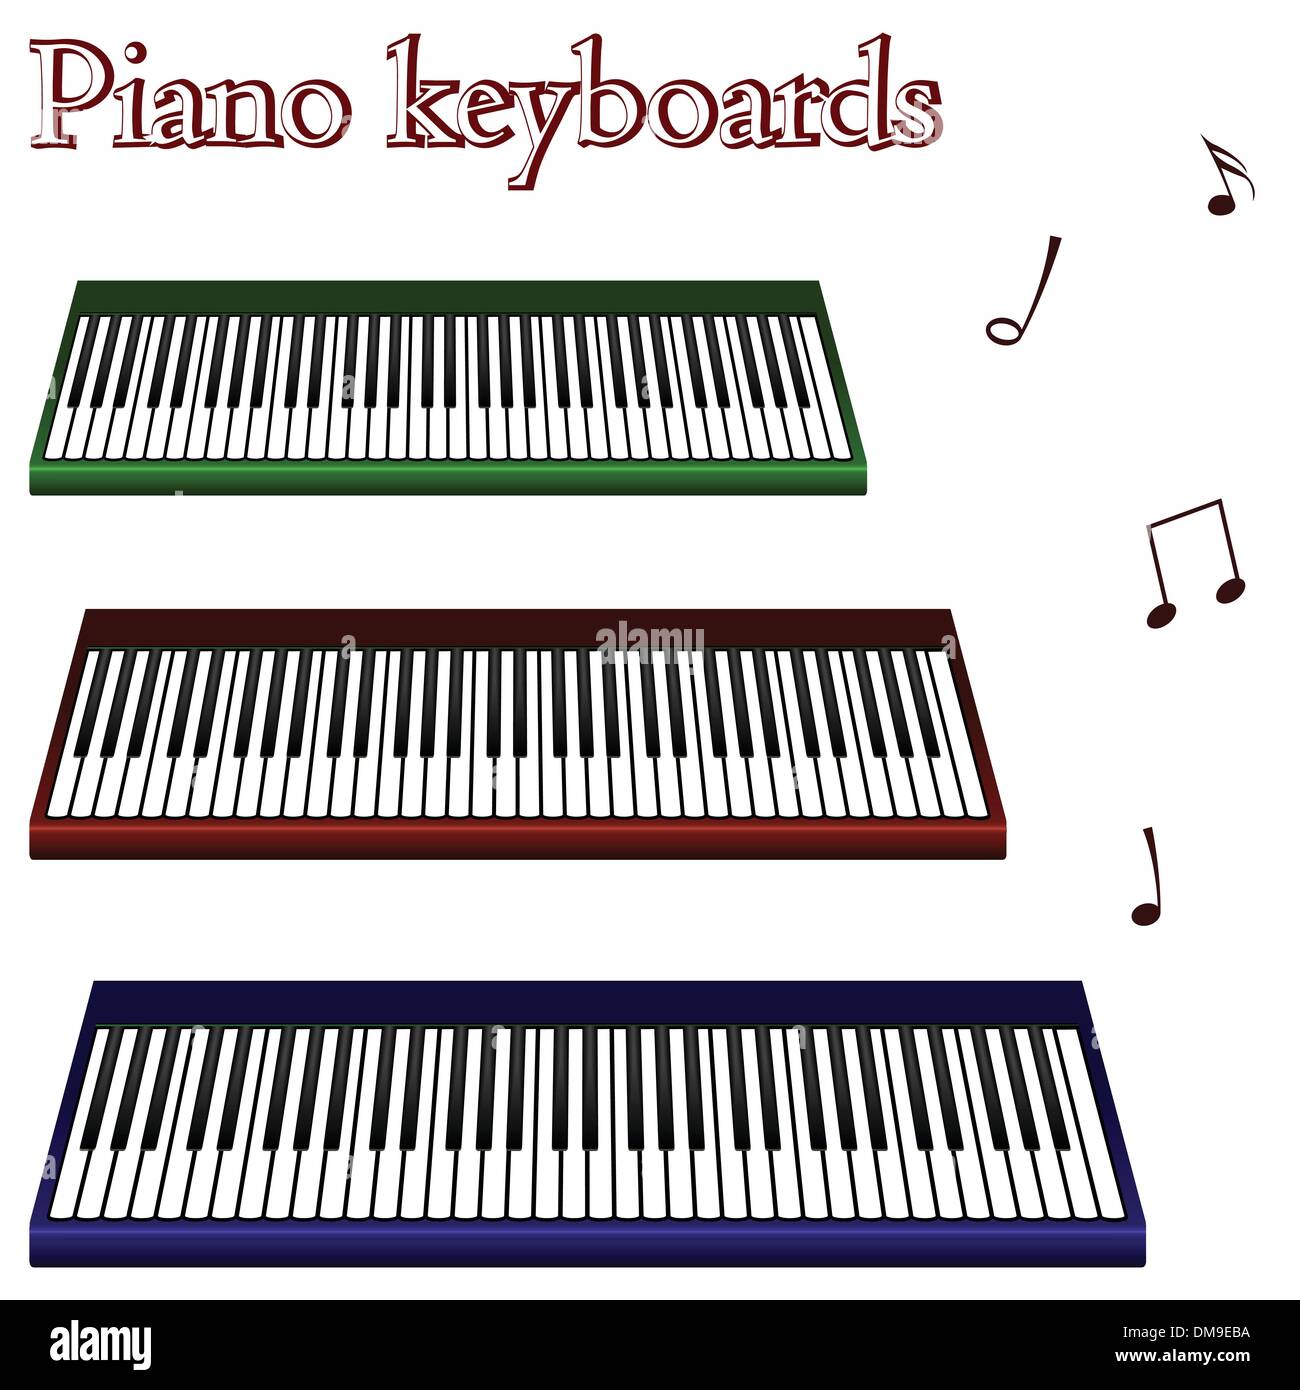 piano keyboards against white Stock Vector